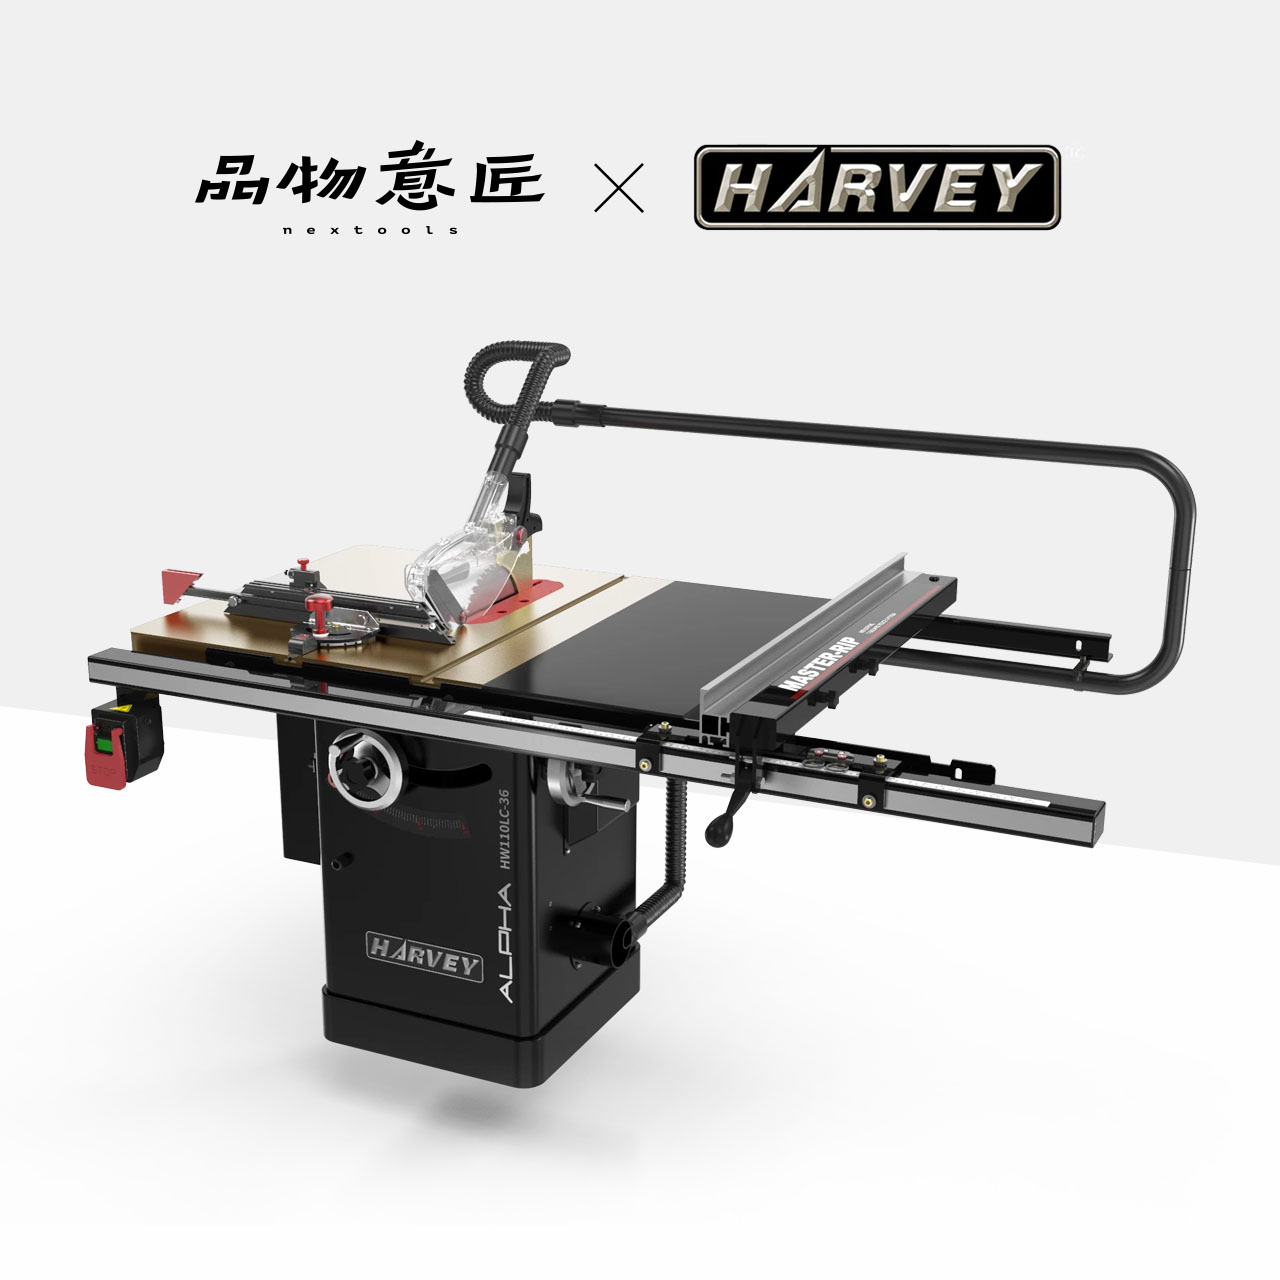 HARVEY Hai Wei Xiaojingang three generation table saw precision woodworking machinery induction motor 10 inch dust-free cutting push table